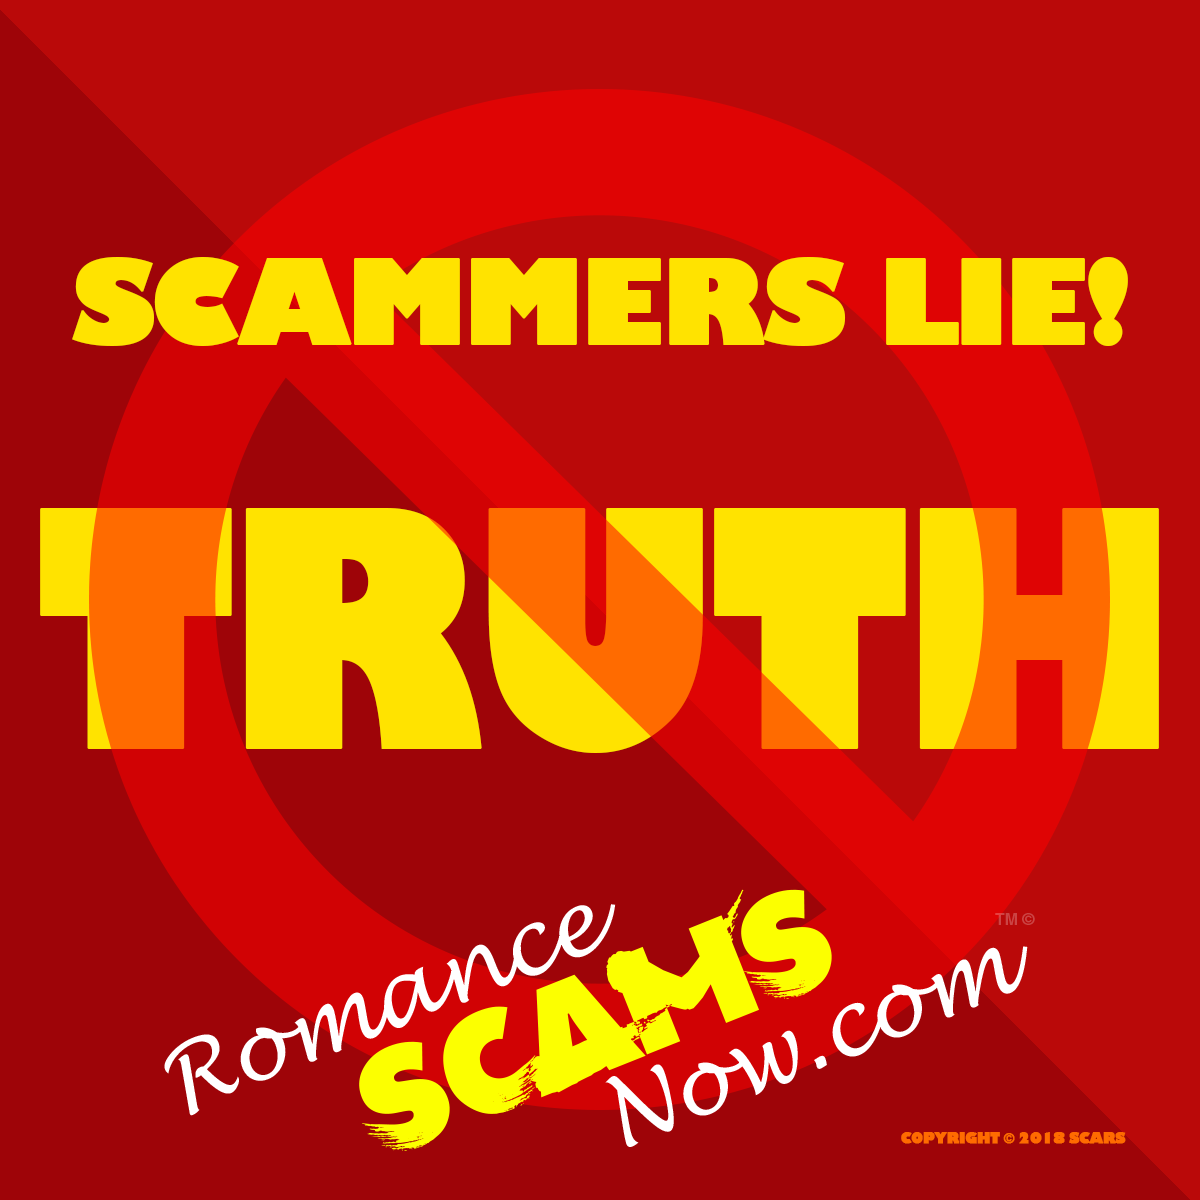 SCARS ™ / RSN™ Anti-Scam Poster 144